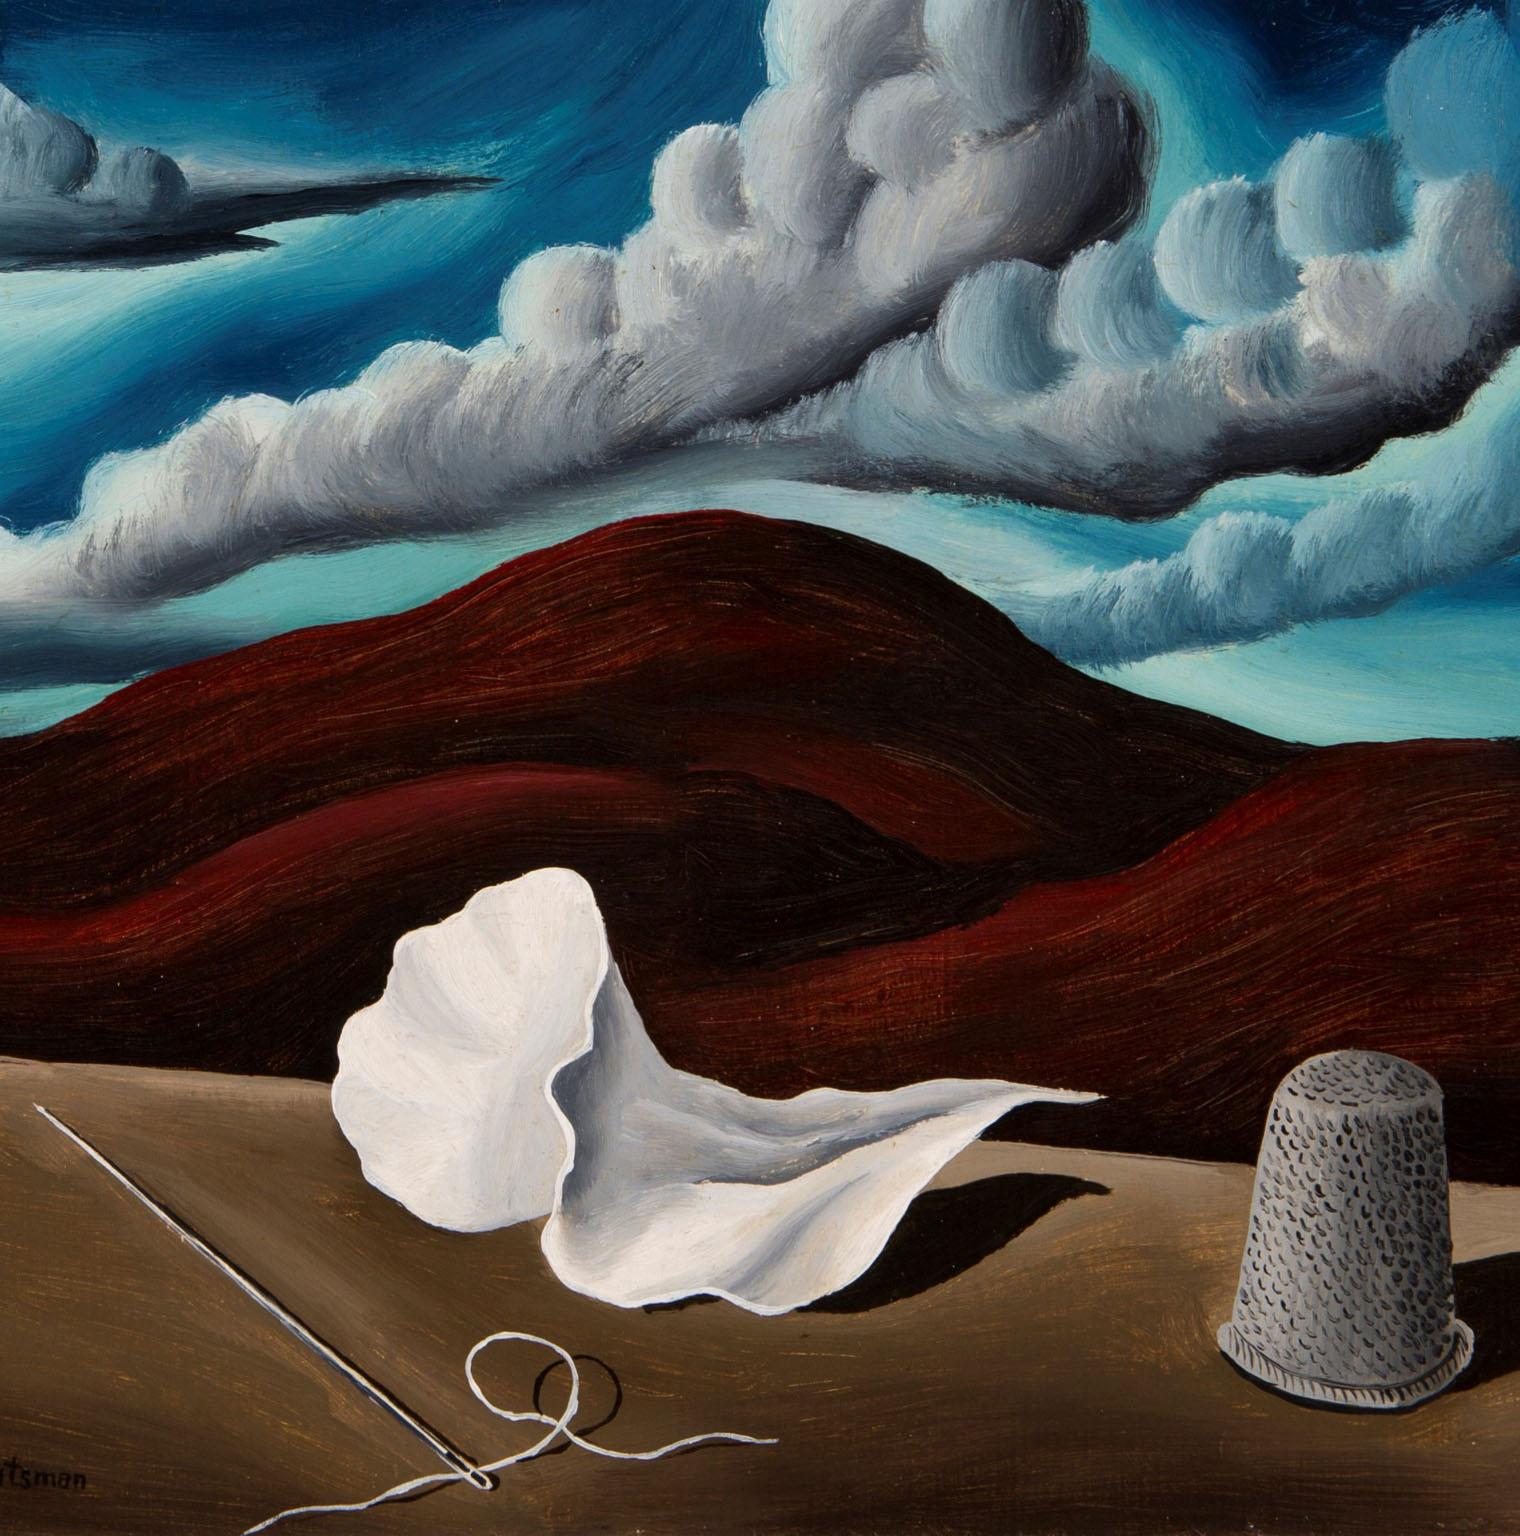 Needle, Thimble and Cloth in Landscape - American Modern Painting by Raphael Gleitsmann